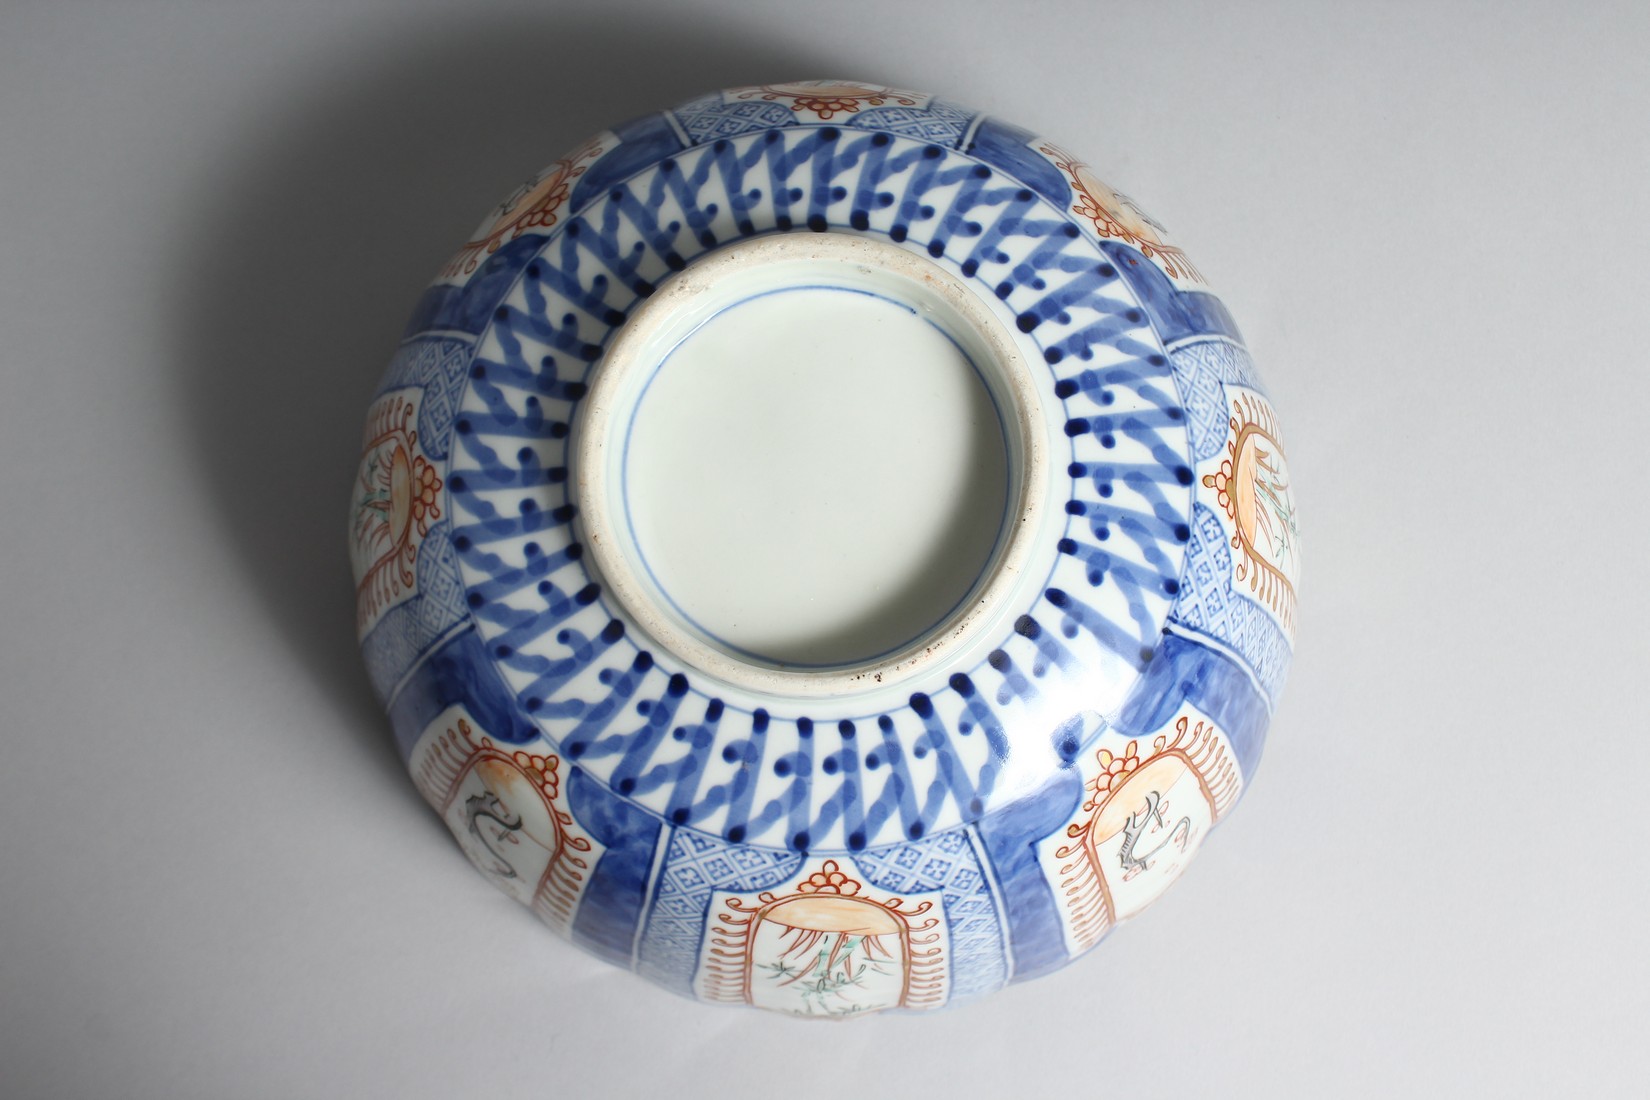 A JAPANESE IMARI PORCELAIN BLUE AND WHITE BOWL, with fluted-form, and decorated with panels of - Image 6 of 7